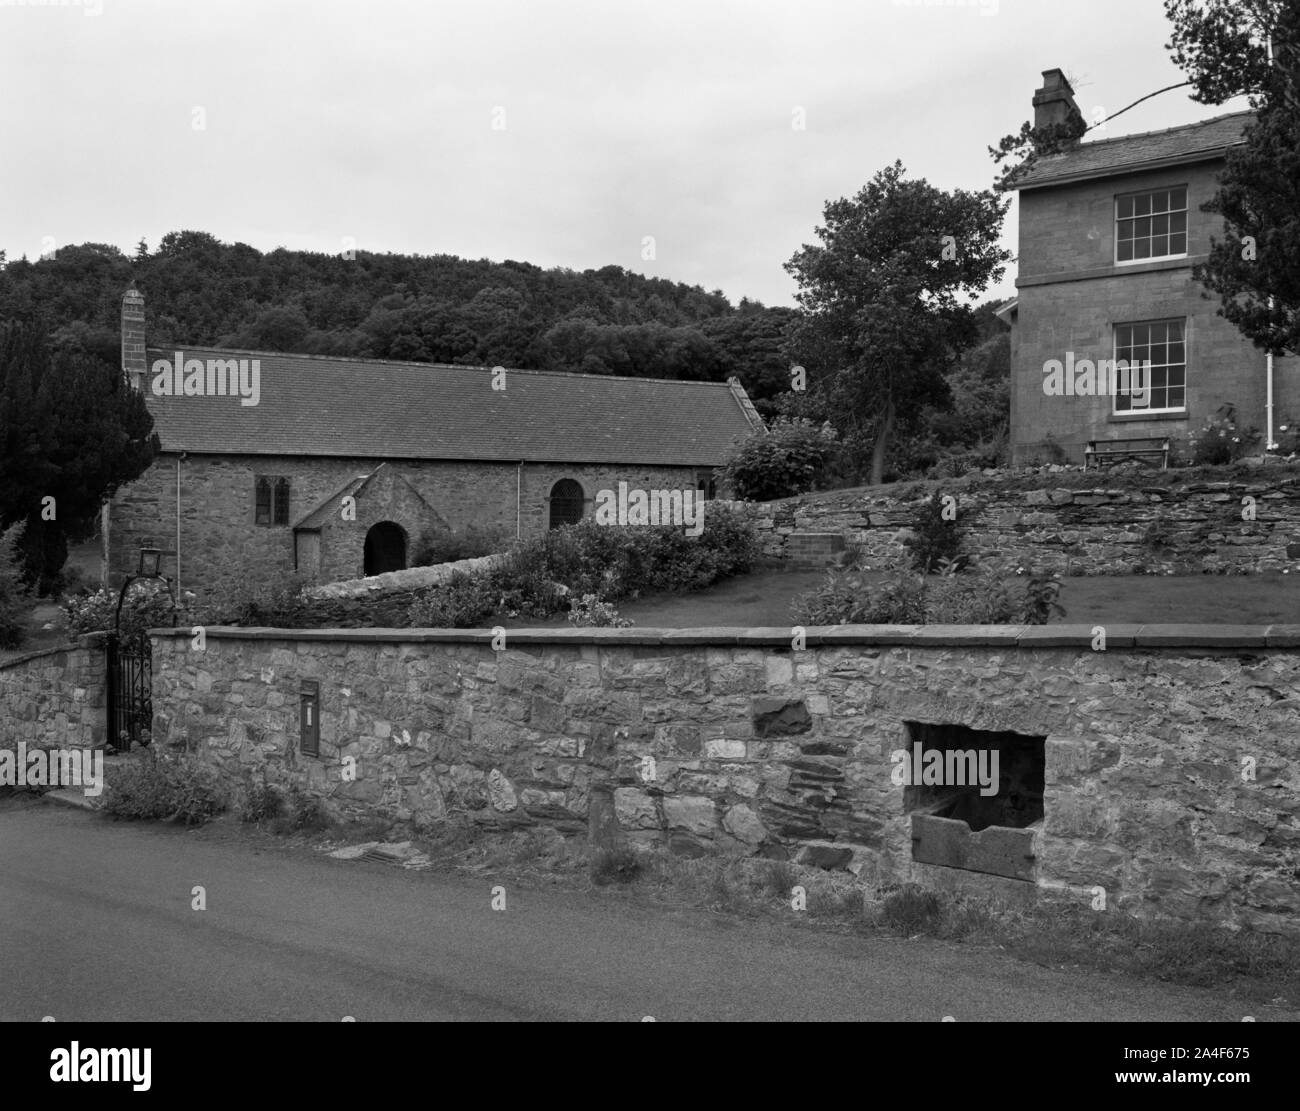 View N of St Mael and St Sulien's church & former vicarage (Ty Cerrig) in Cwm, Denbighshire, Wales, UK. Animal drinking trough set into garden wall. Stock Photo